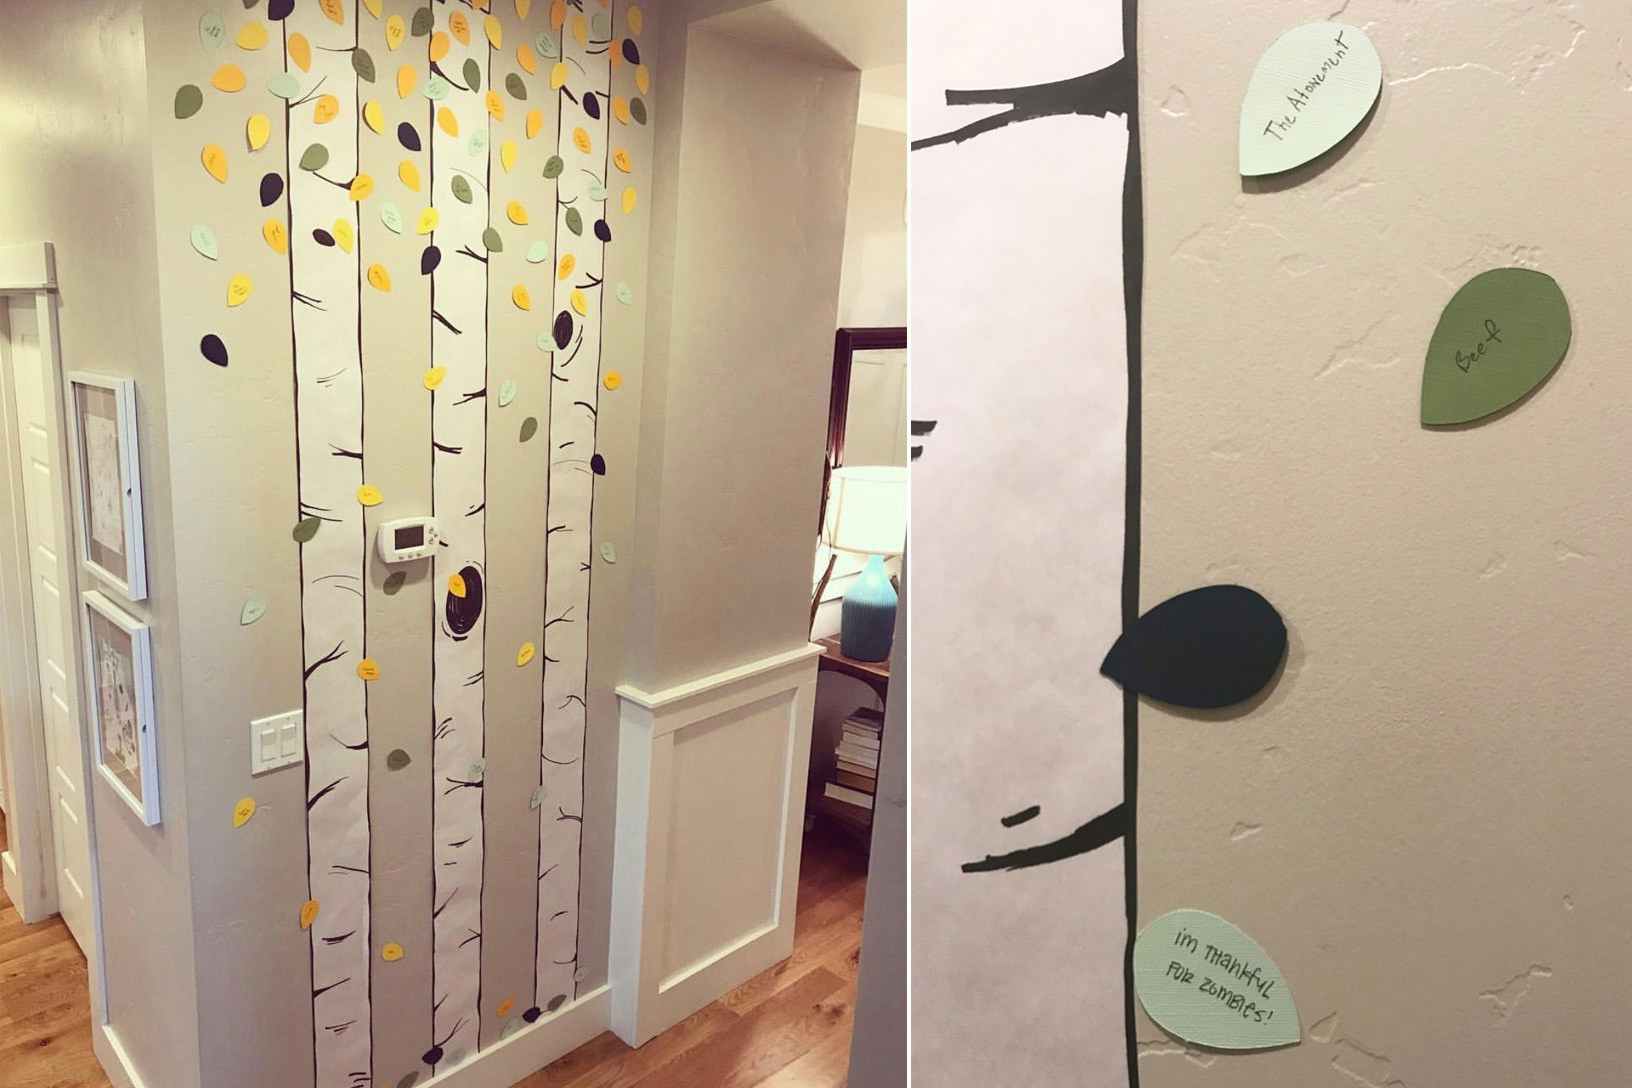 diy paper tree on wall with thankful messages on leaves 